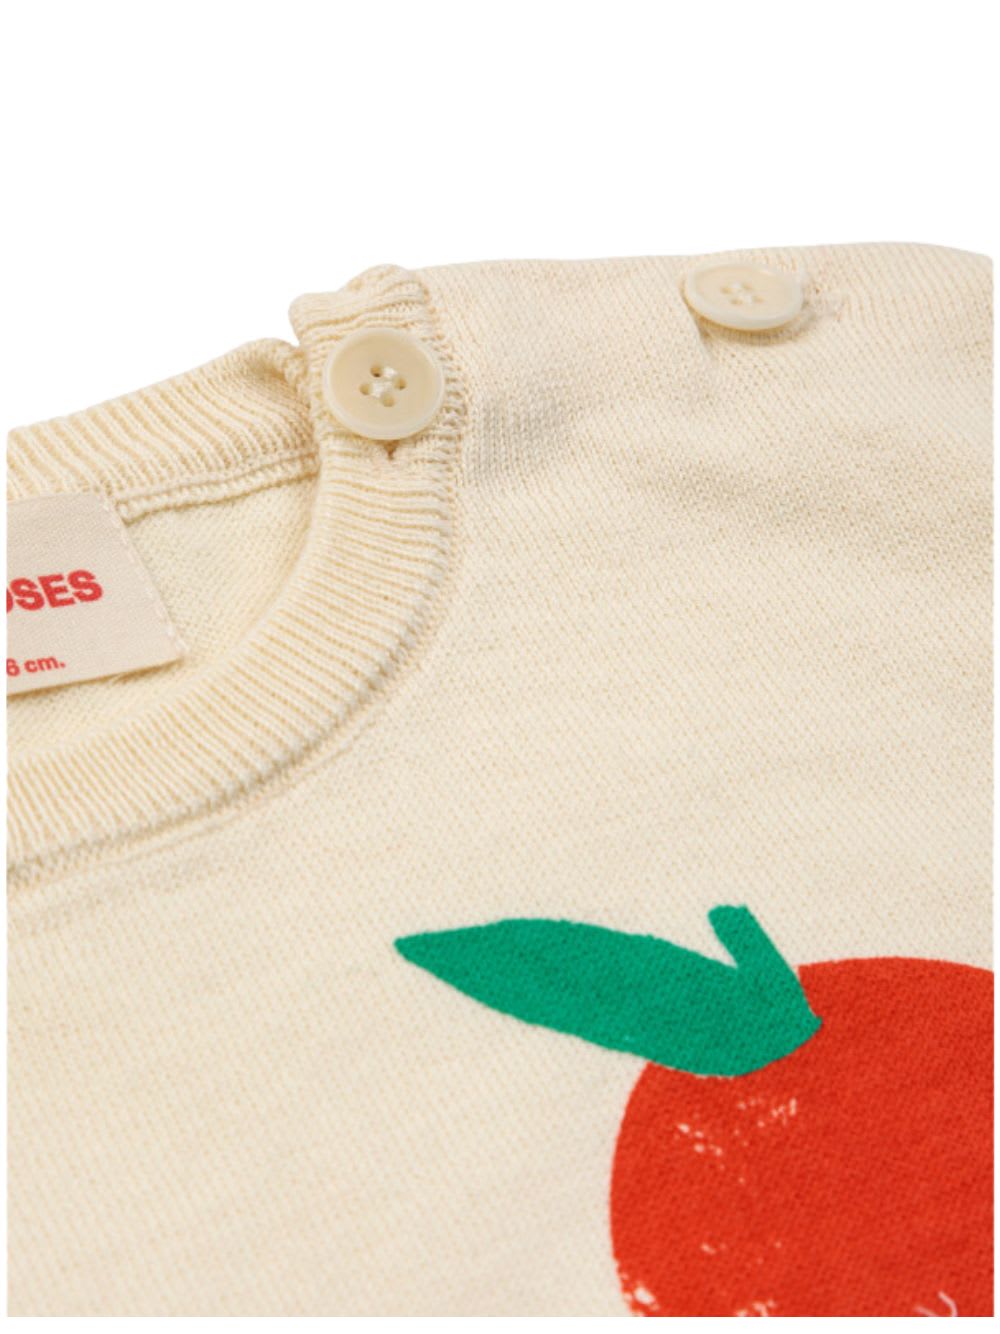 Shop Bobo Choses Baby Tomato Knitted T-shirt In Off White